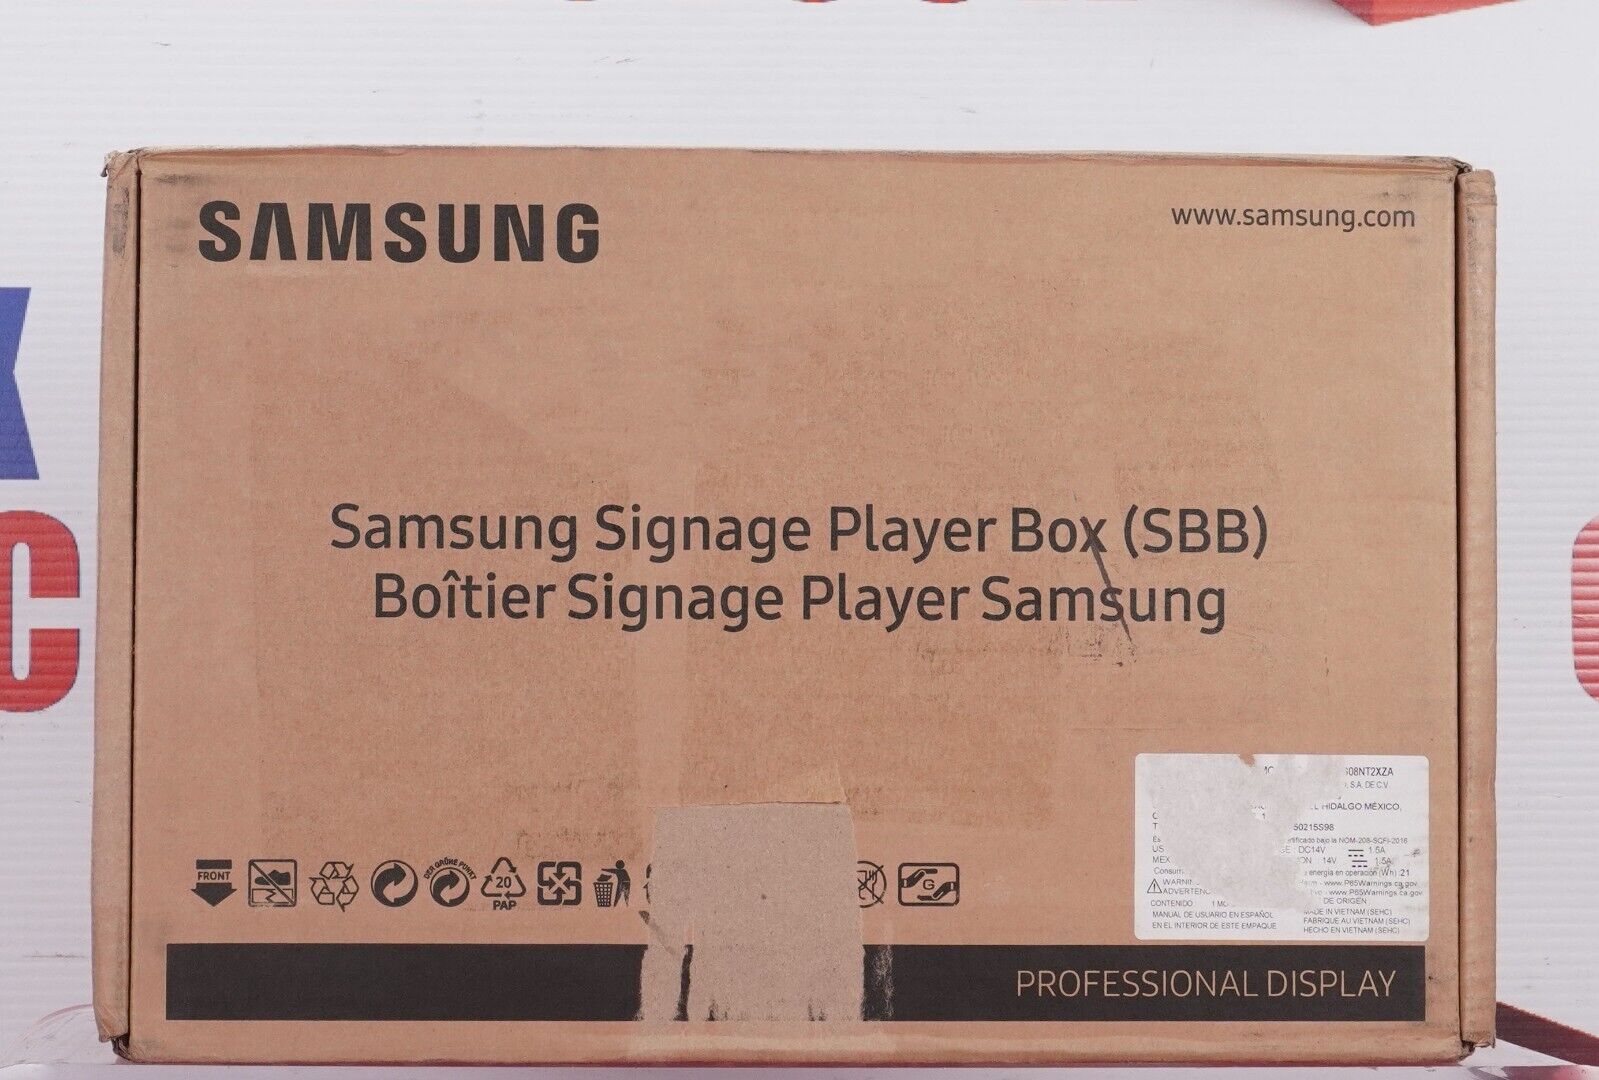 Samsung SBB-SSN Digital Signage Player Appliance - New Factory Sealed